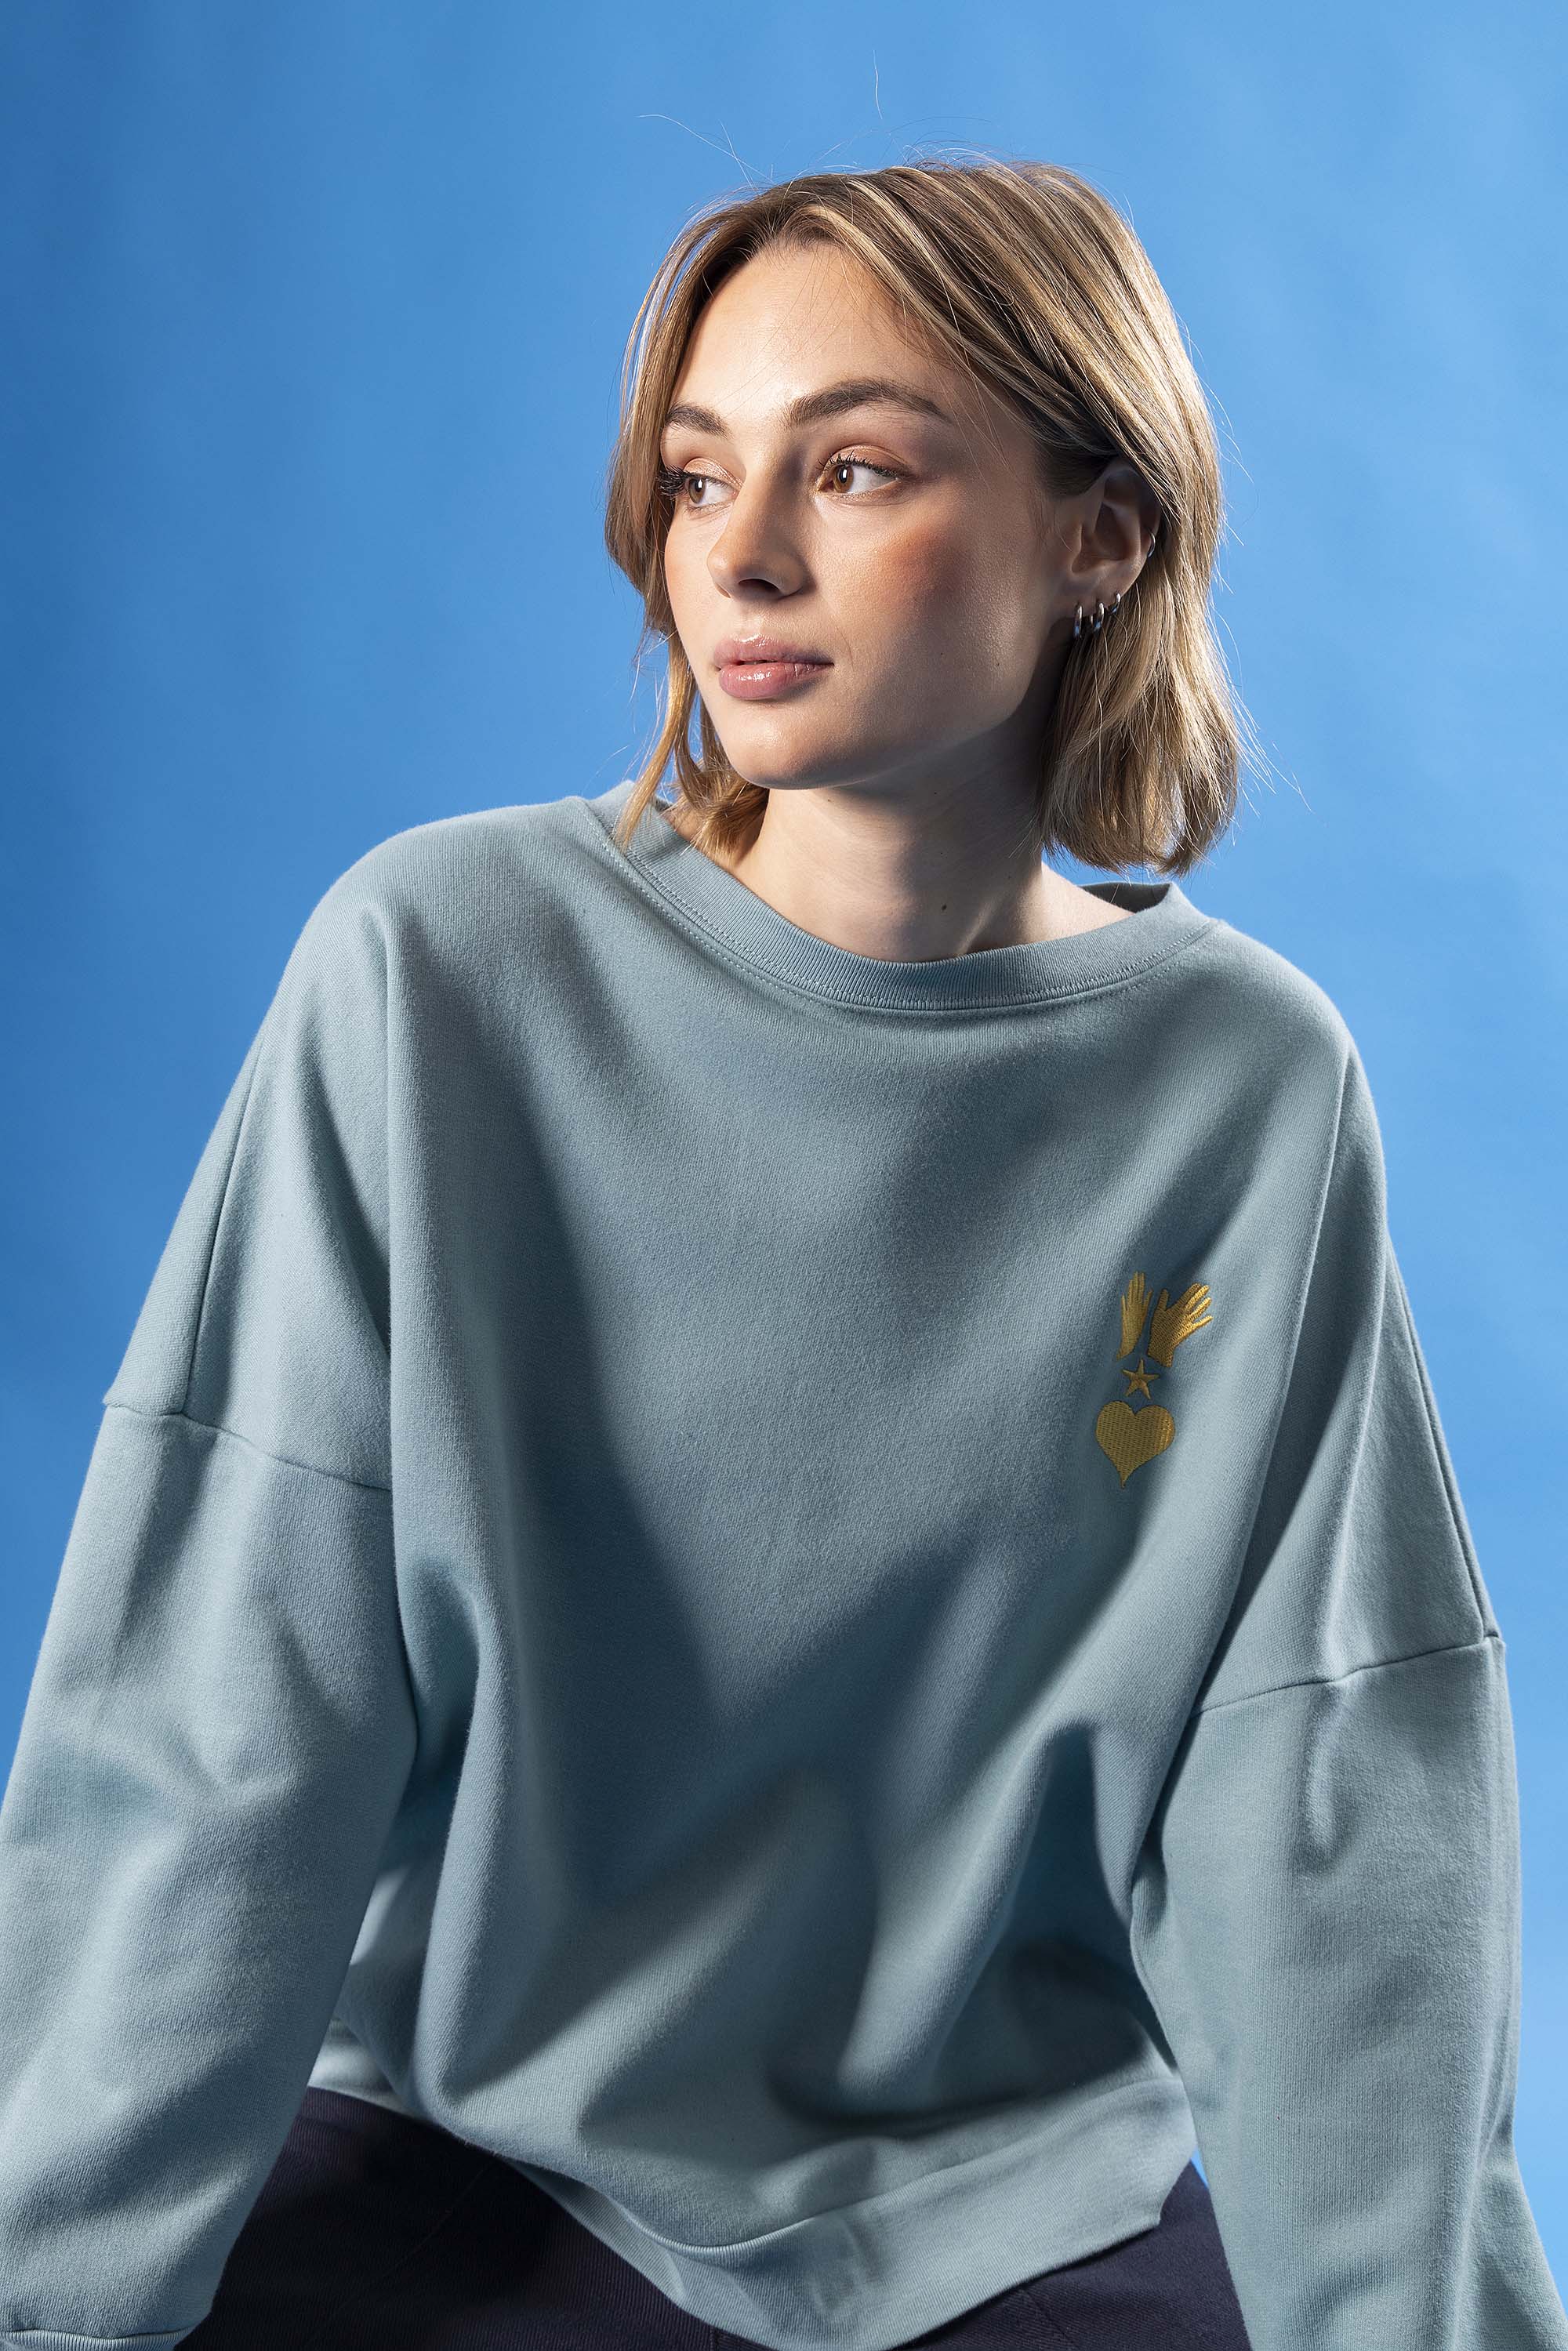 Oversized sweatshirt in blue green cotton and embroidered logo